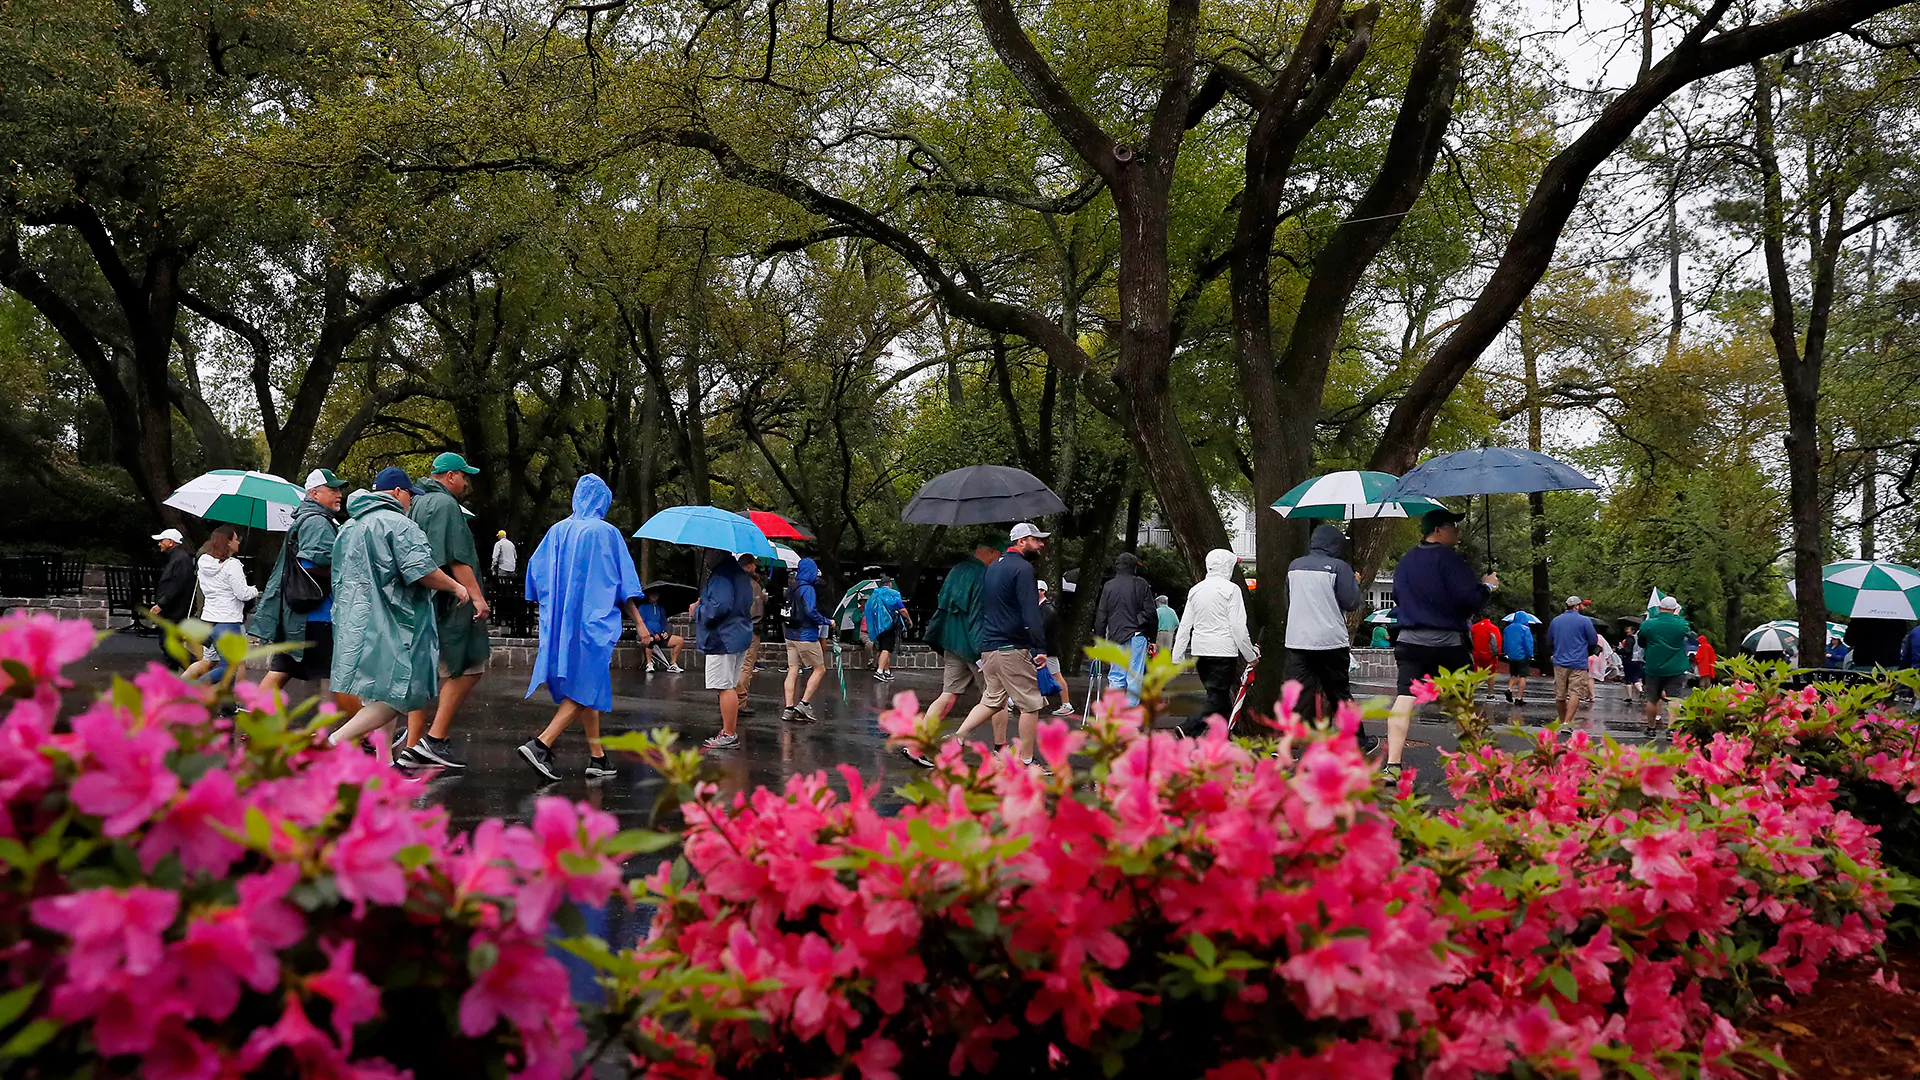 After dry Thursday, storms in forecast for Masters week